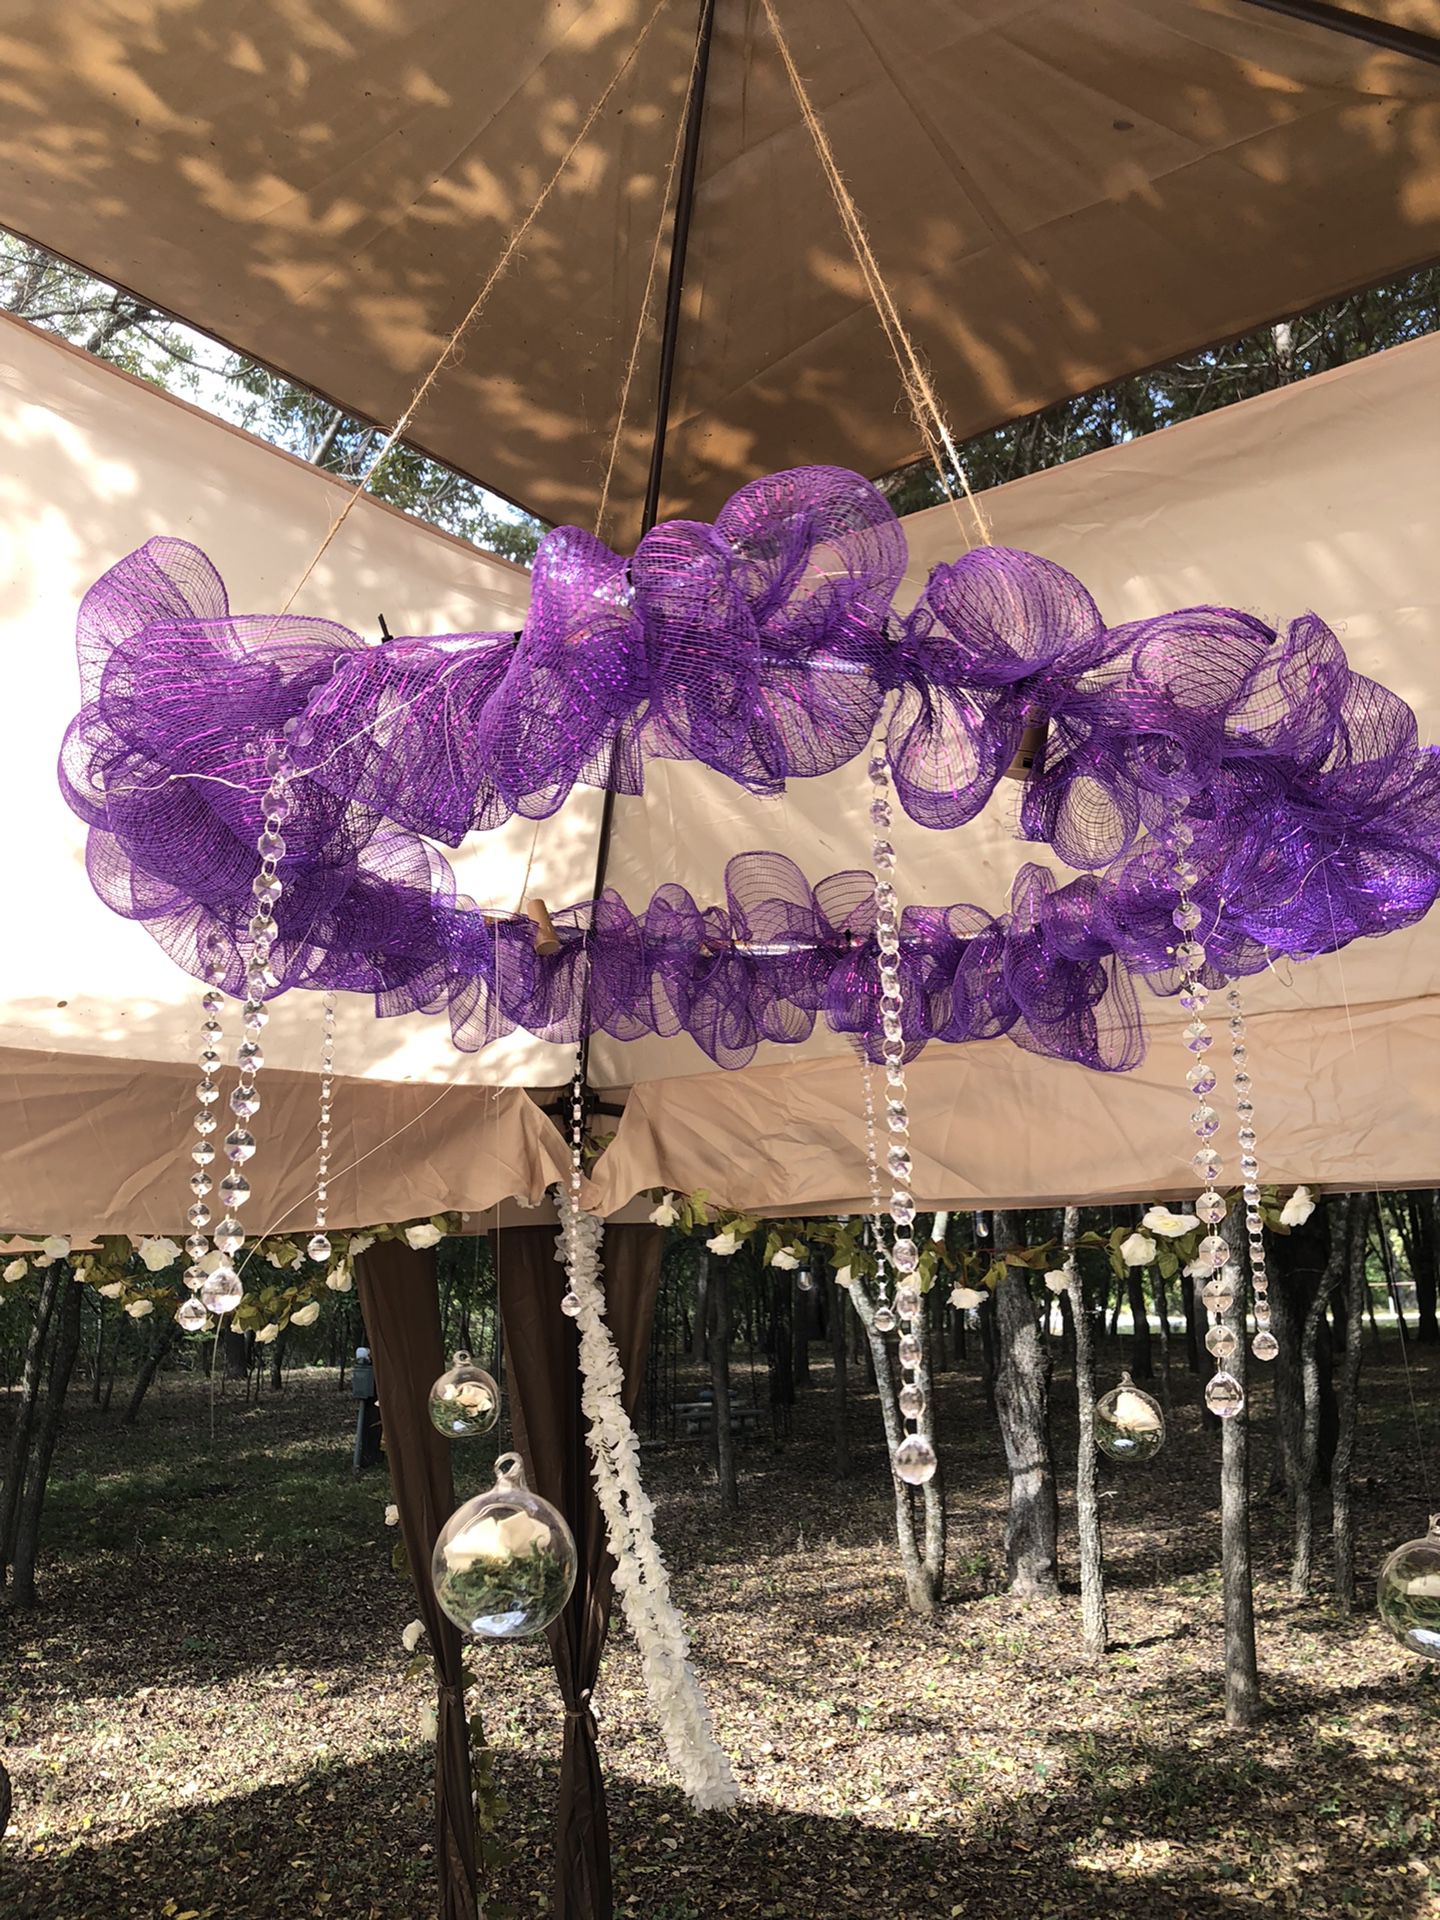 Wedding Decor: Purple Mesh Chandeliers (3) With Beading And Glass Globes, and 1 Purple Mesh Wreath With White Flowers 